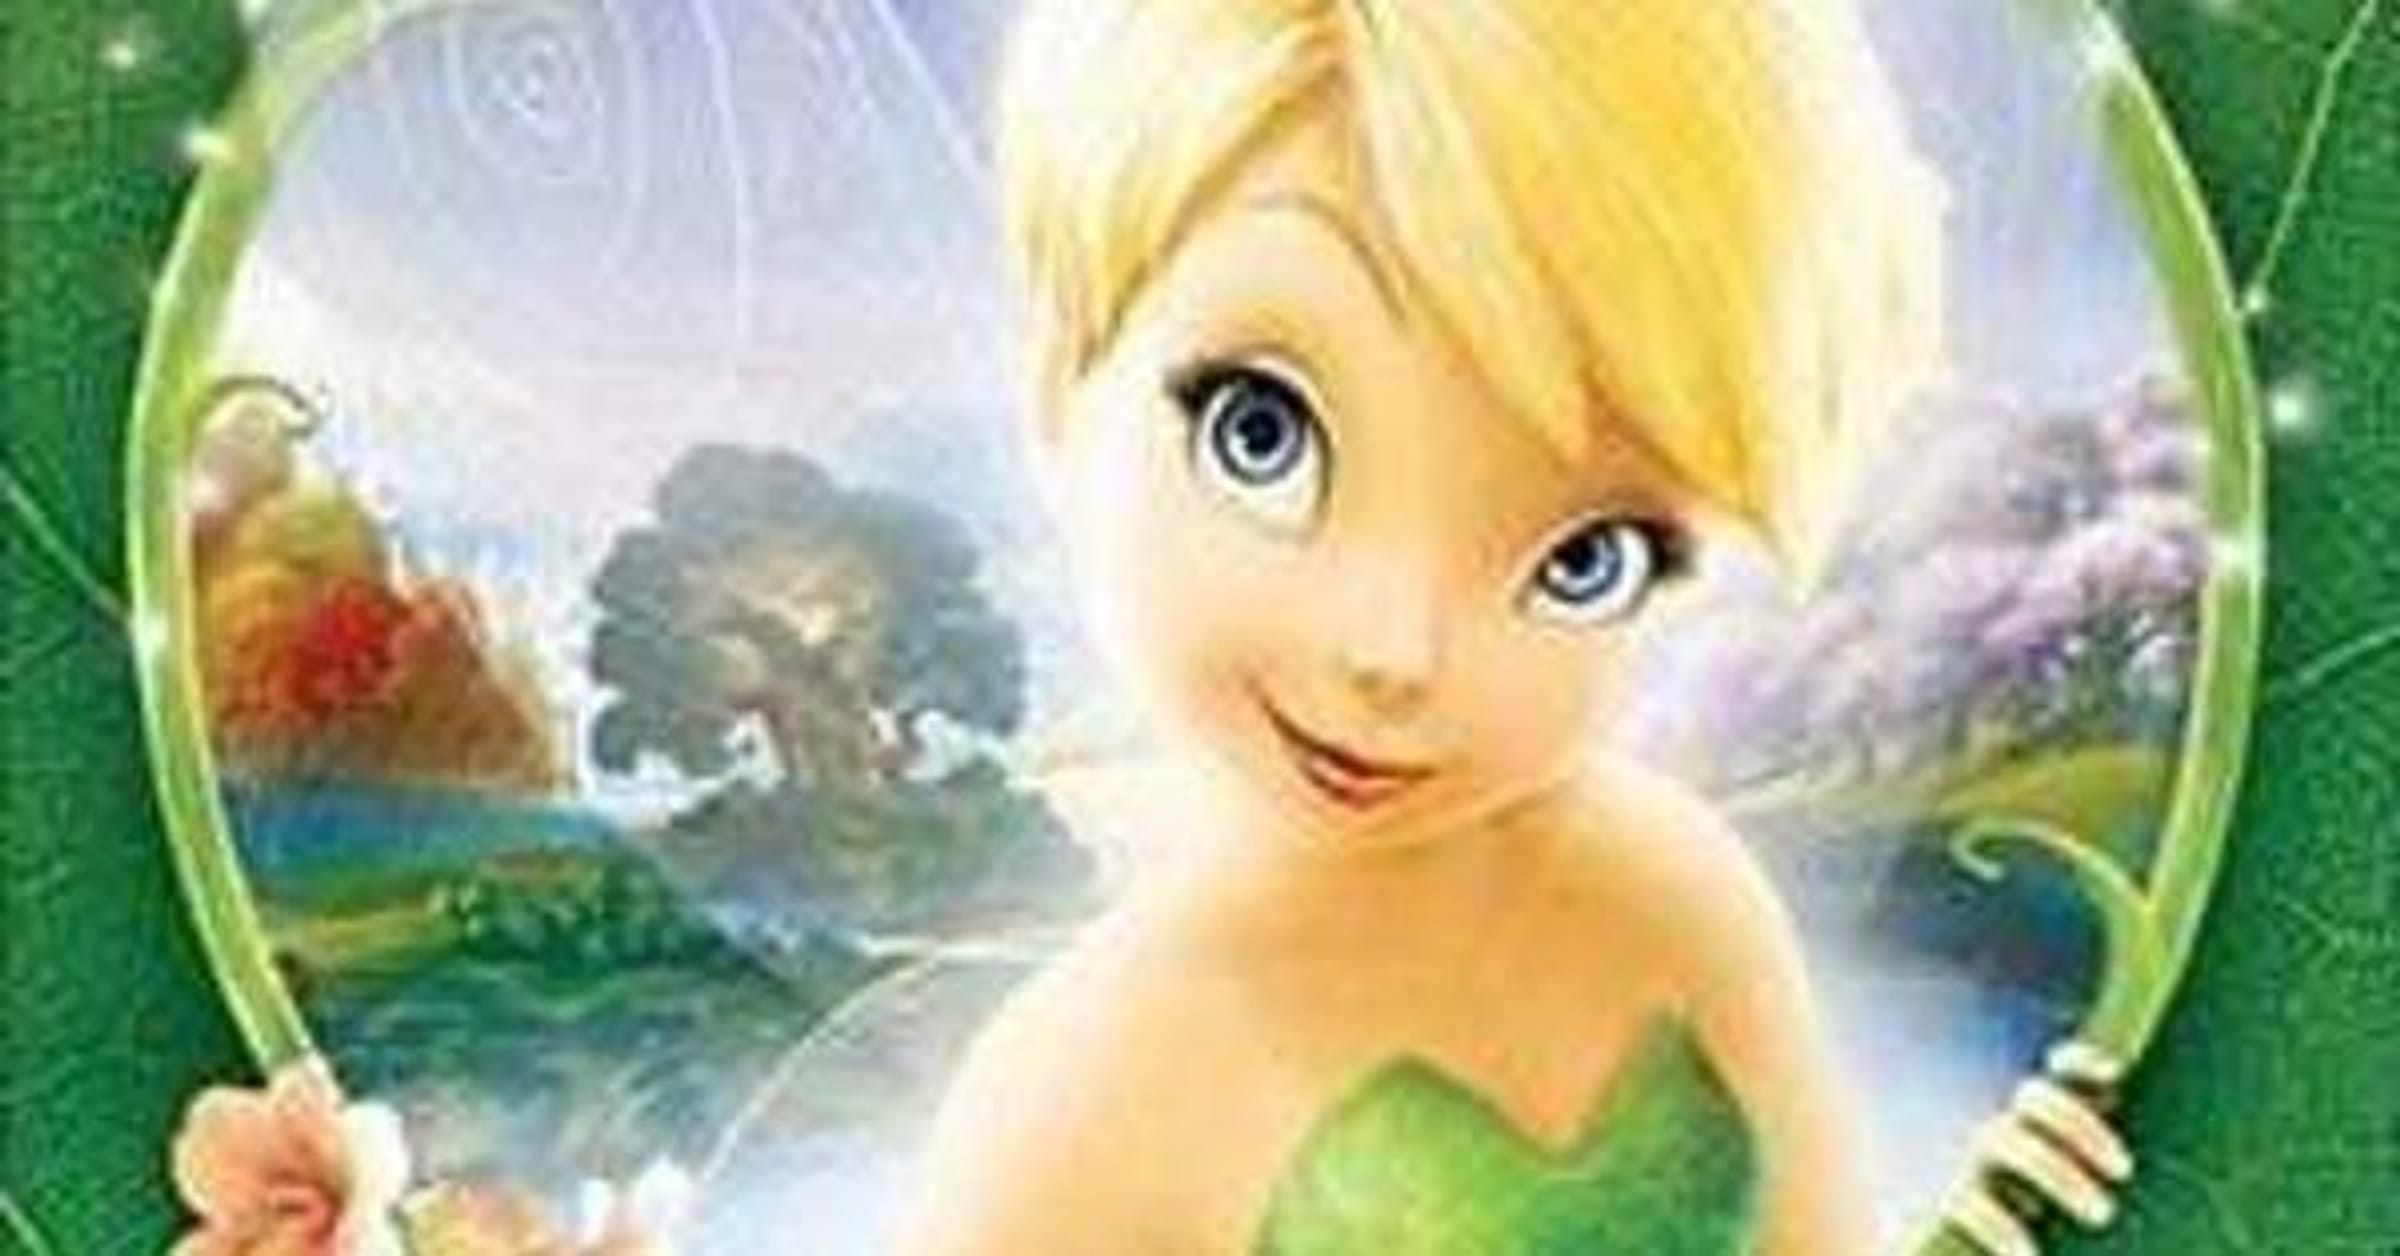 tinkerbell characters names and pictures